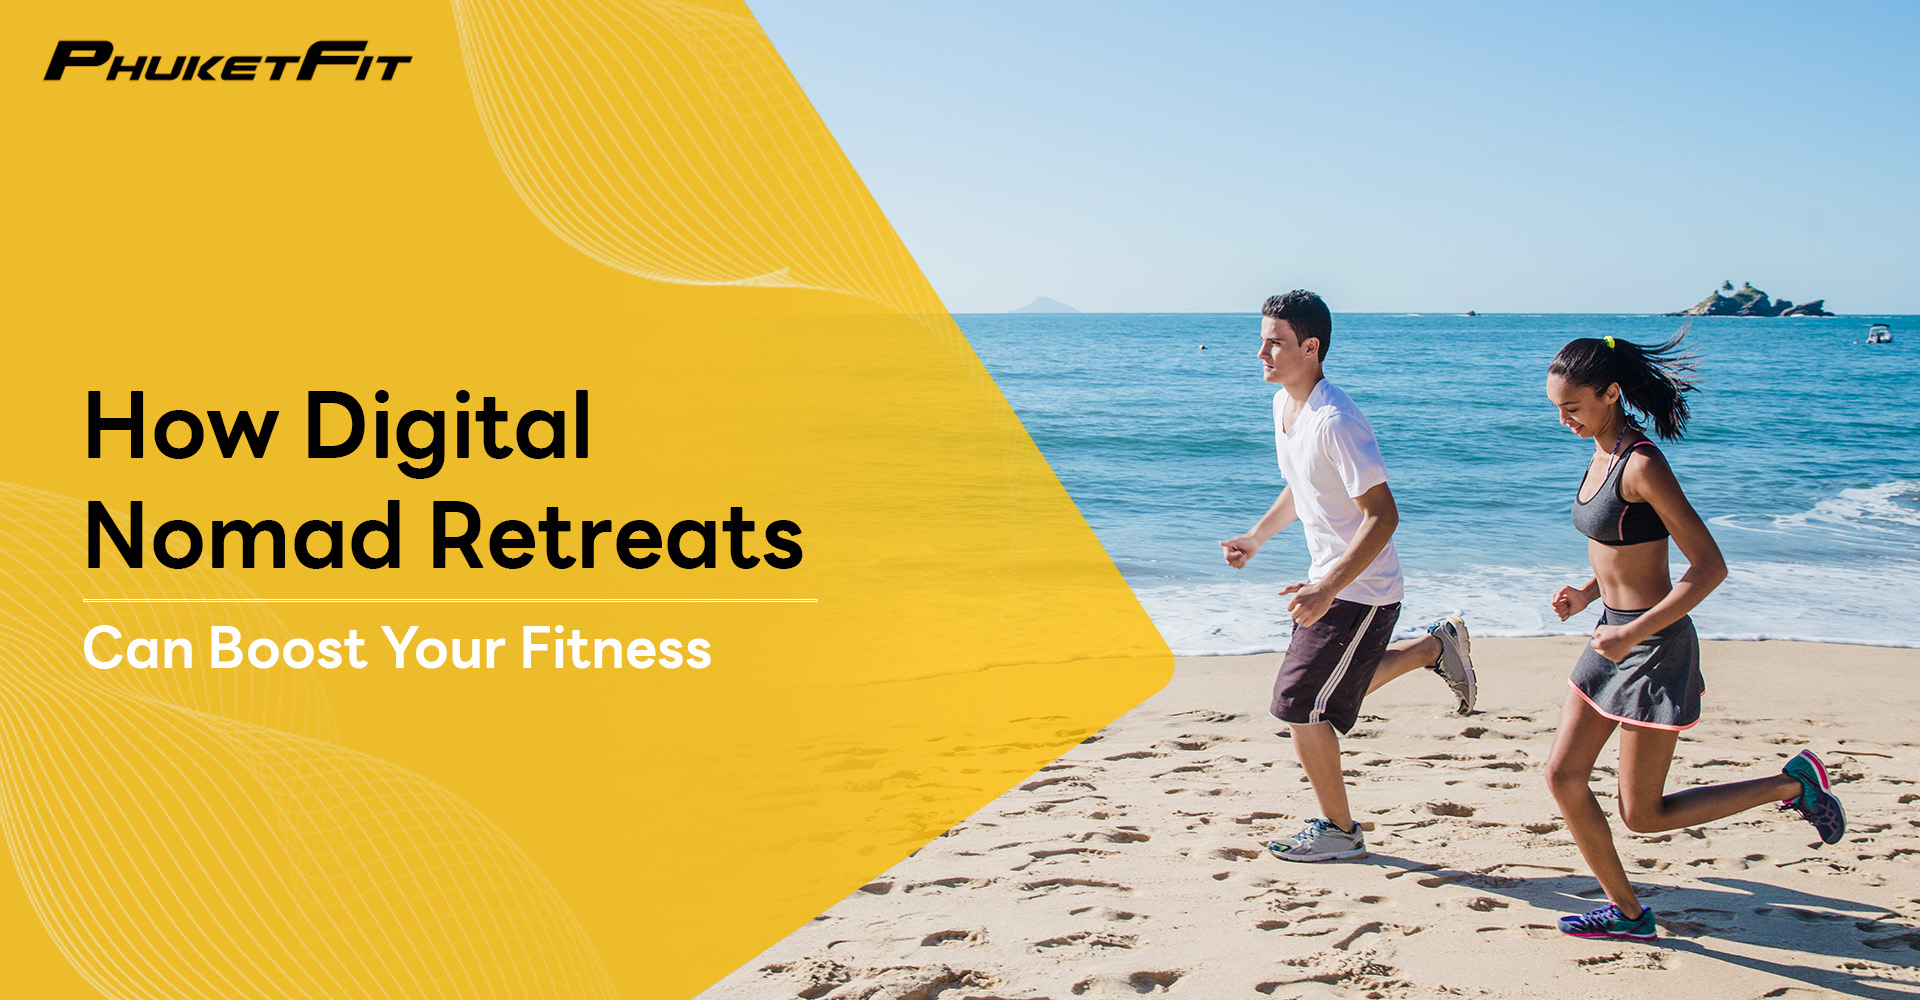 How Digital Nomad Retreats Can Boost Your Fitness